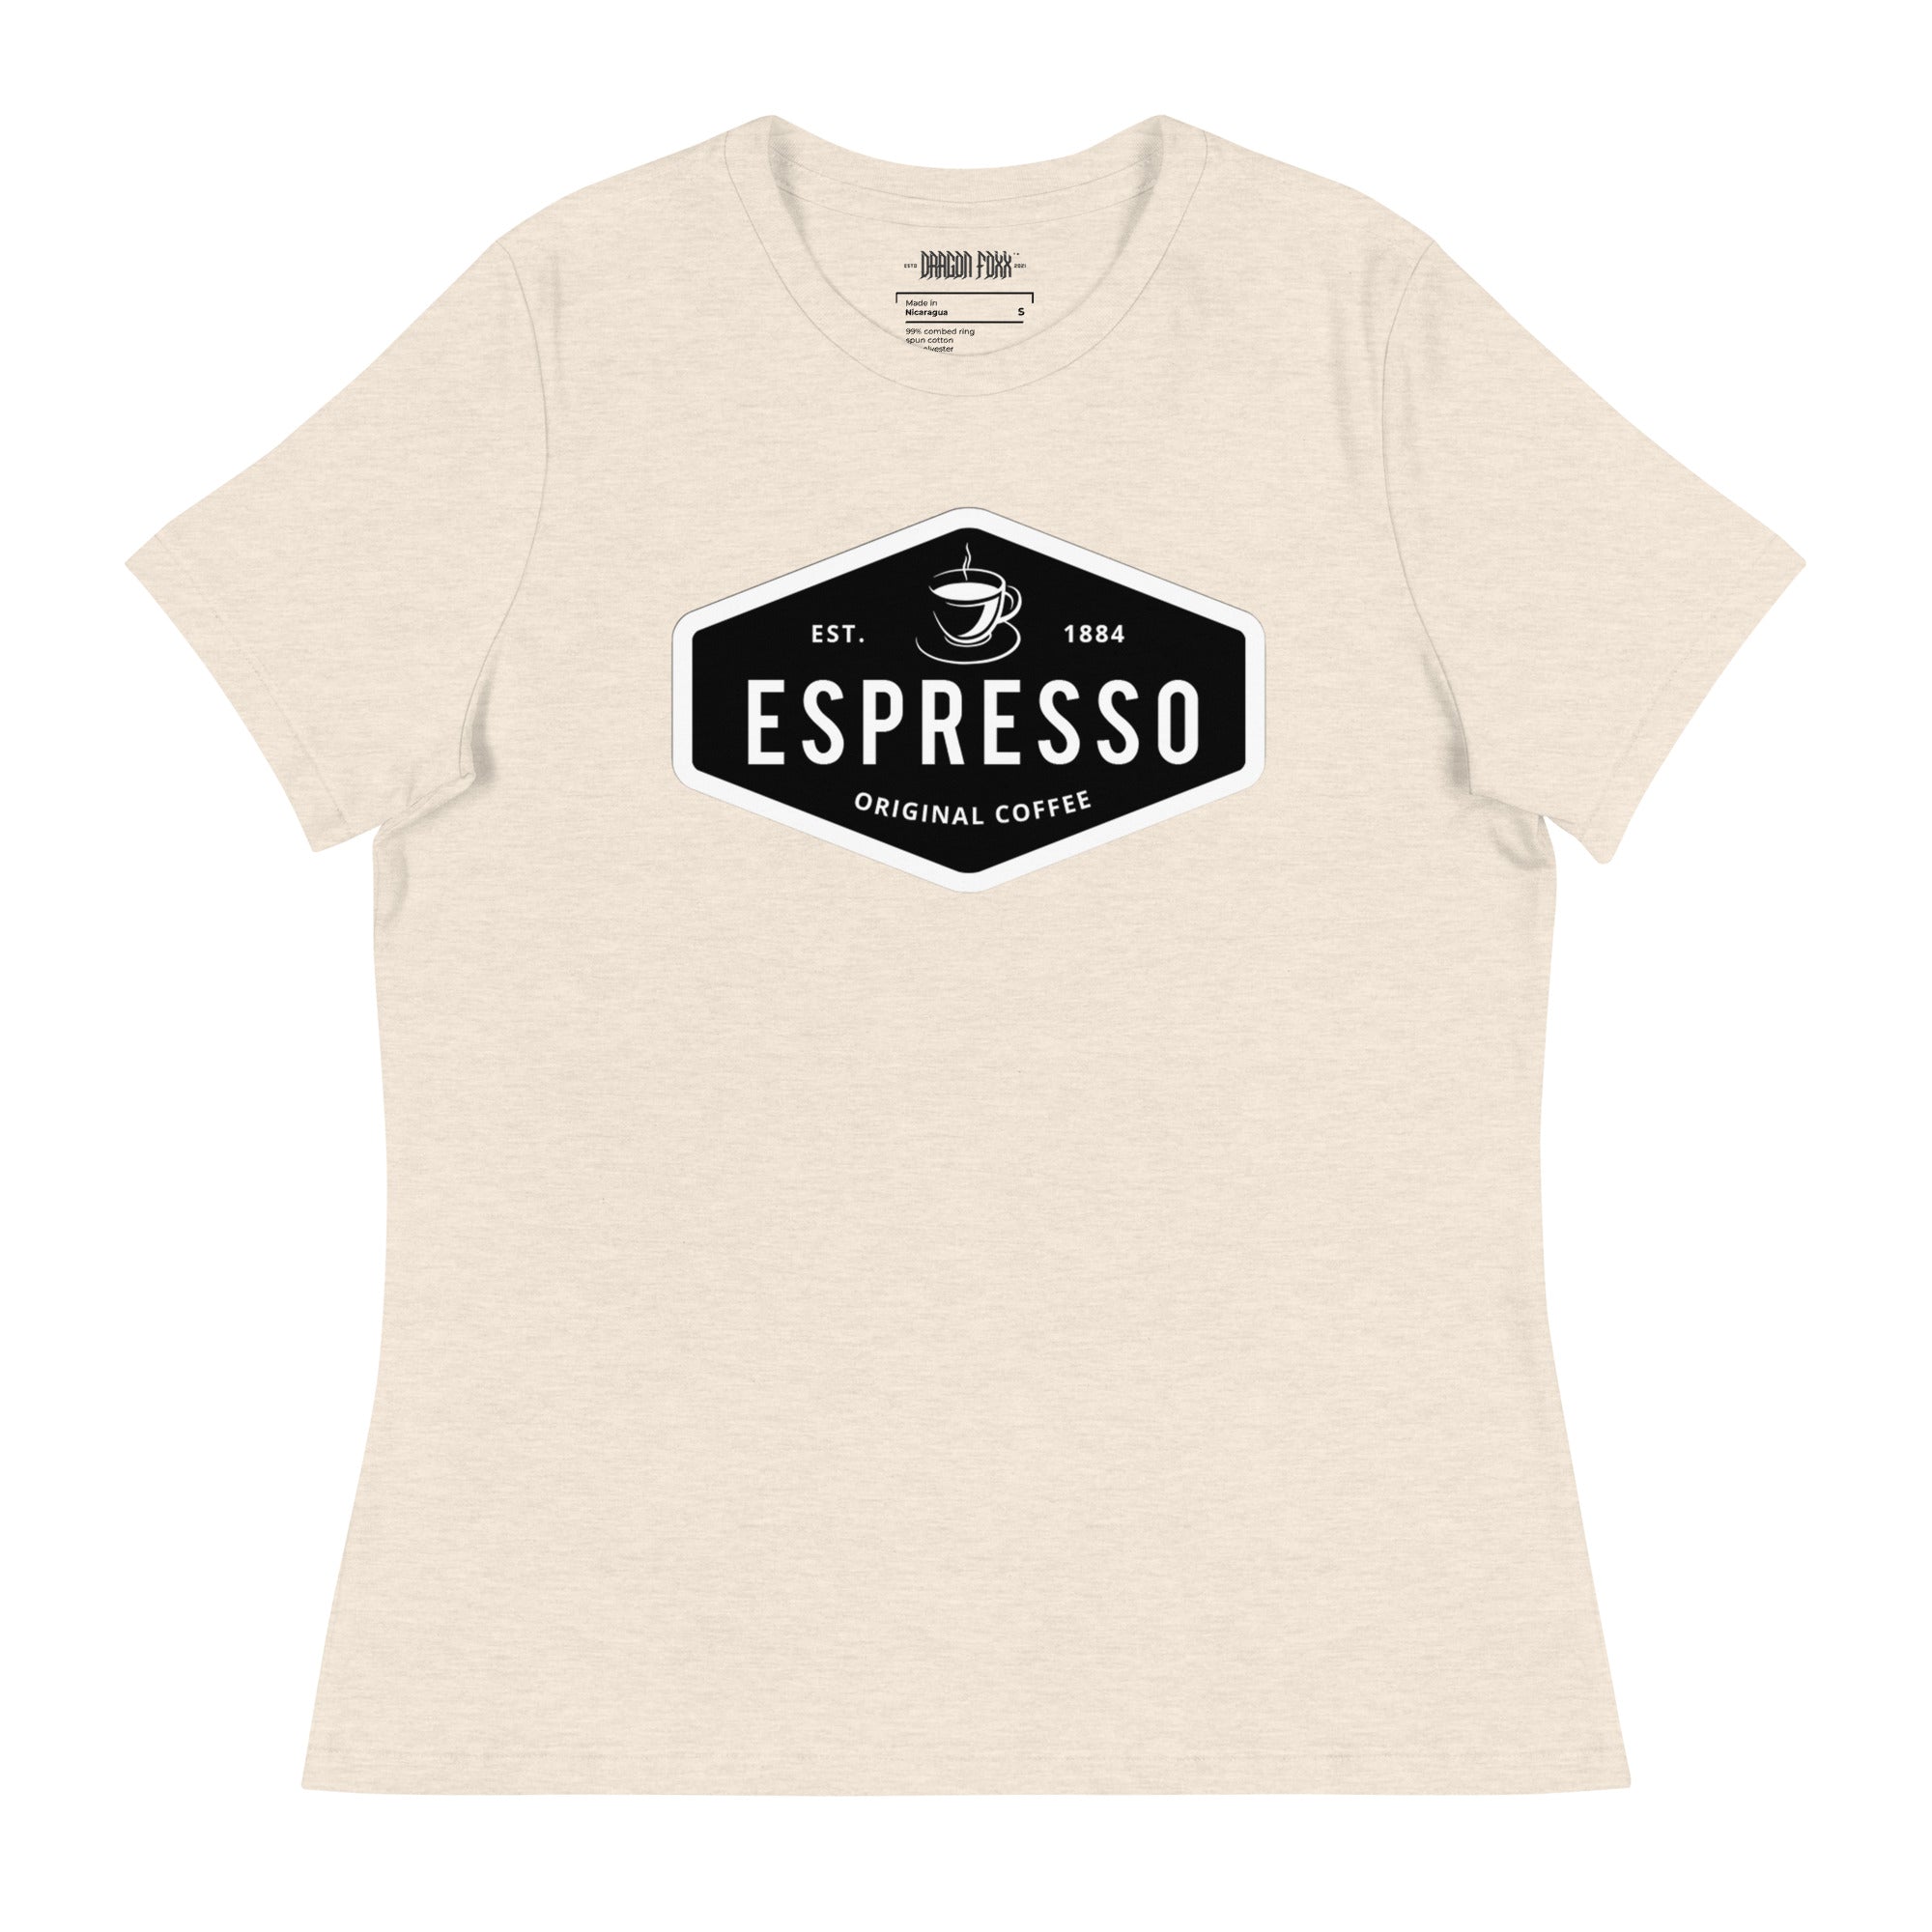 ESPRESSO - Women's Relaxed Fit Graphic T-Shirt in 16 Colors - Women's Relaxed Fit Graphic T-Shirt - DRAGON FOXX™ - 7218598_10545 - Heather Prism Natural - S - Athletic Heather T-shirt - Berry T-shirt - Black T-shirt